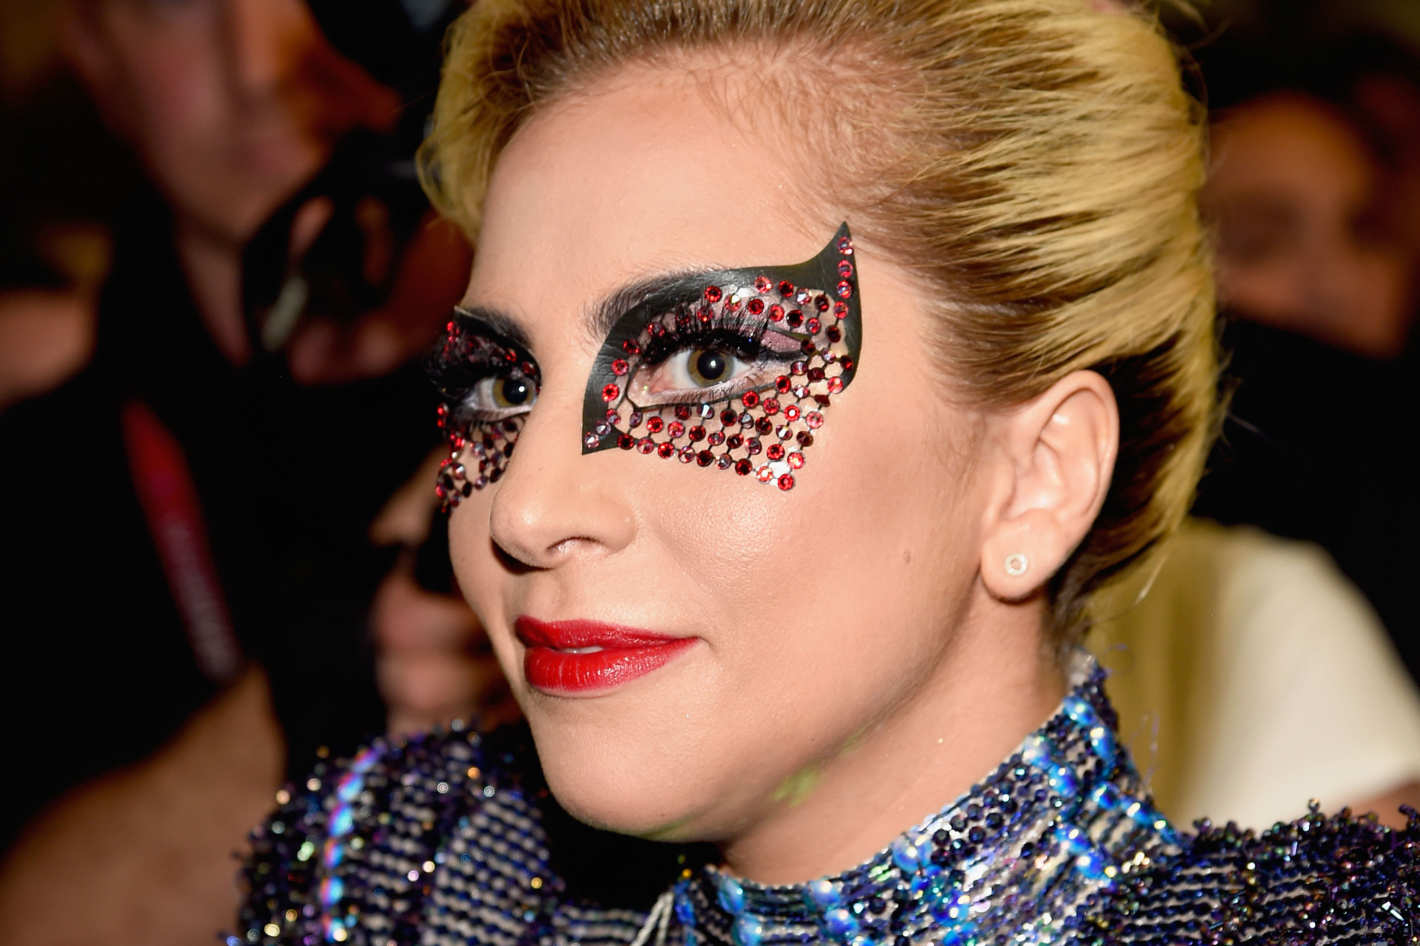 Rhinestones For Eyes Makeup The 23 Makeup Products From Lady Gagas Super Bowl Look